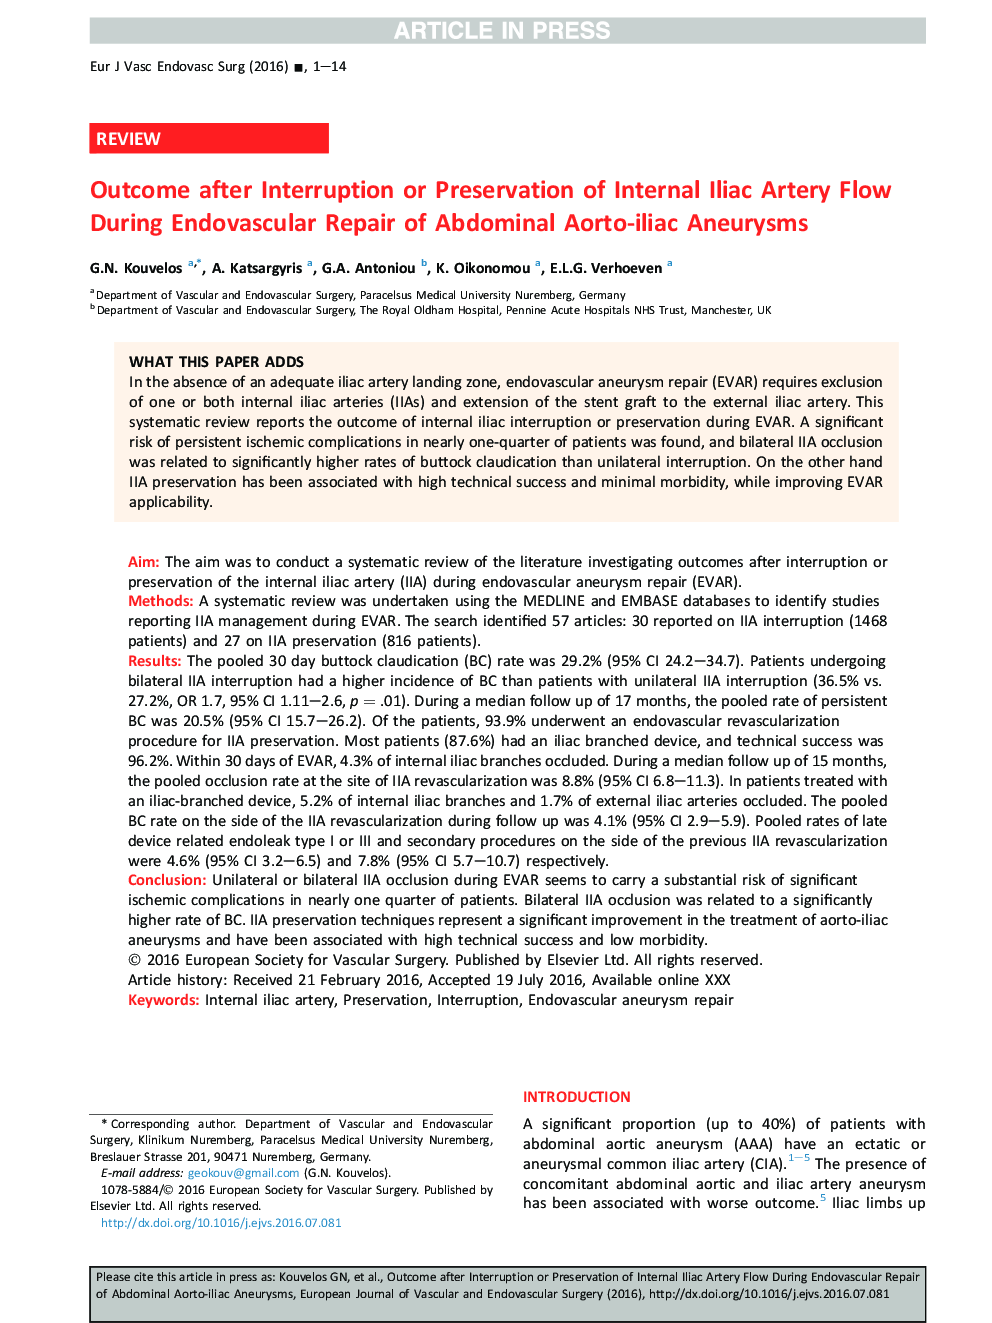 Outcome after Interruption or Preservation of Internal Iliac Artery Flow During Endovascular Repair of Abdominal Aorto-iliac Aneurysms